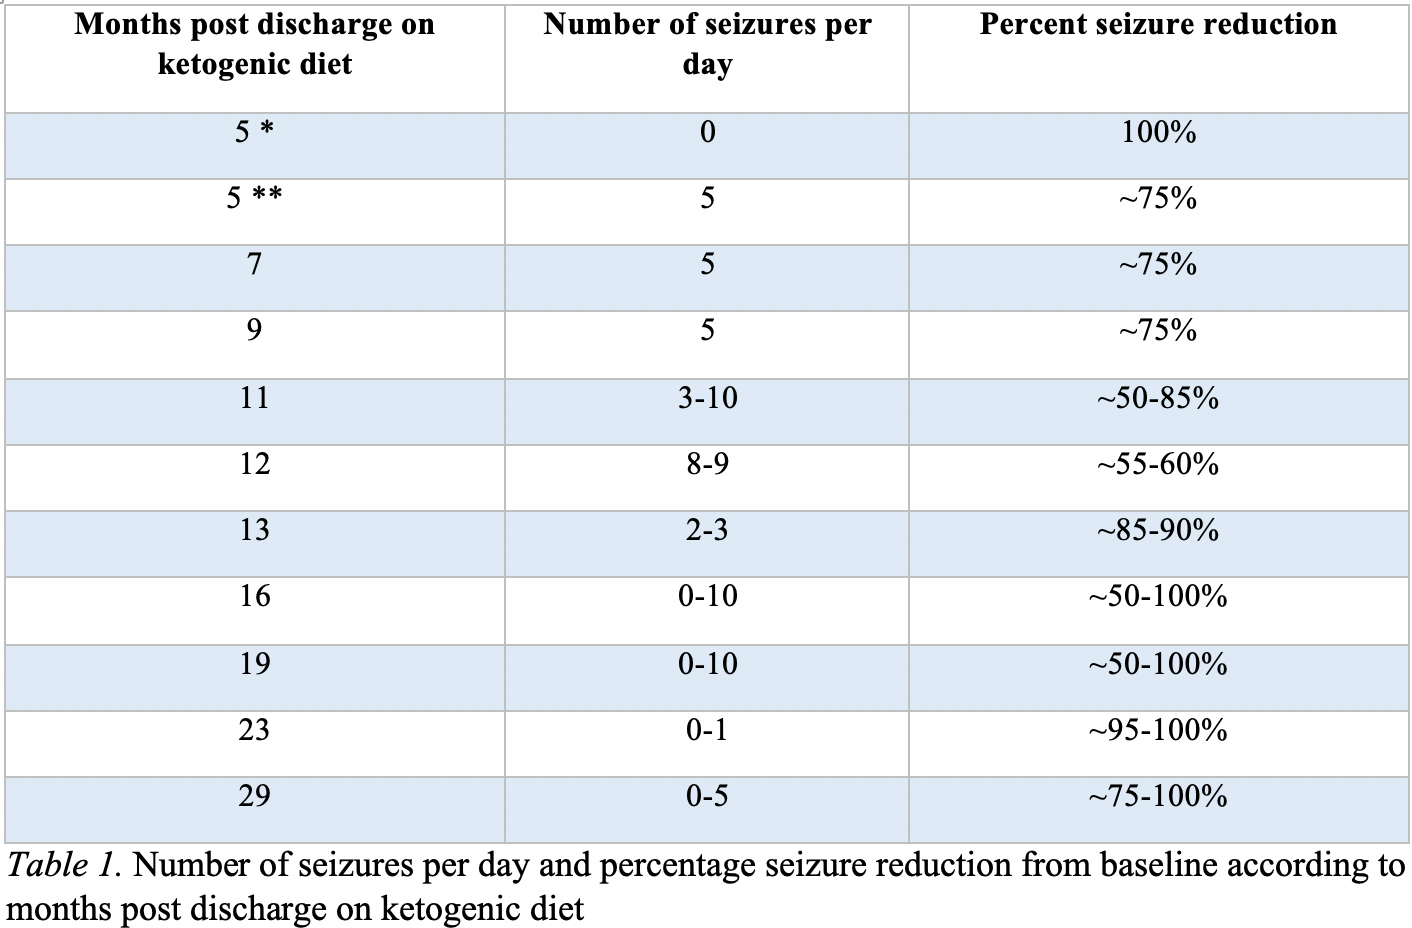 seizure reduction from baseline according to months post discharge on ketogenic diet 